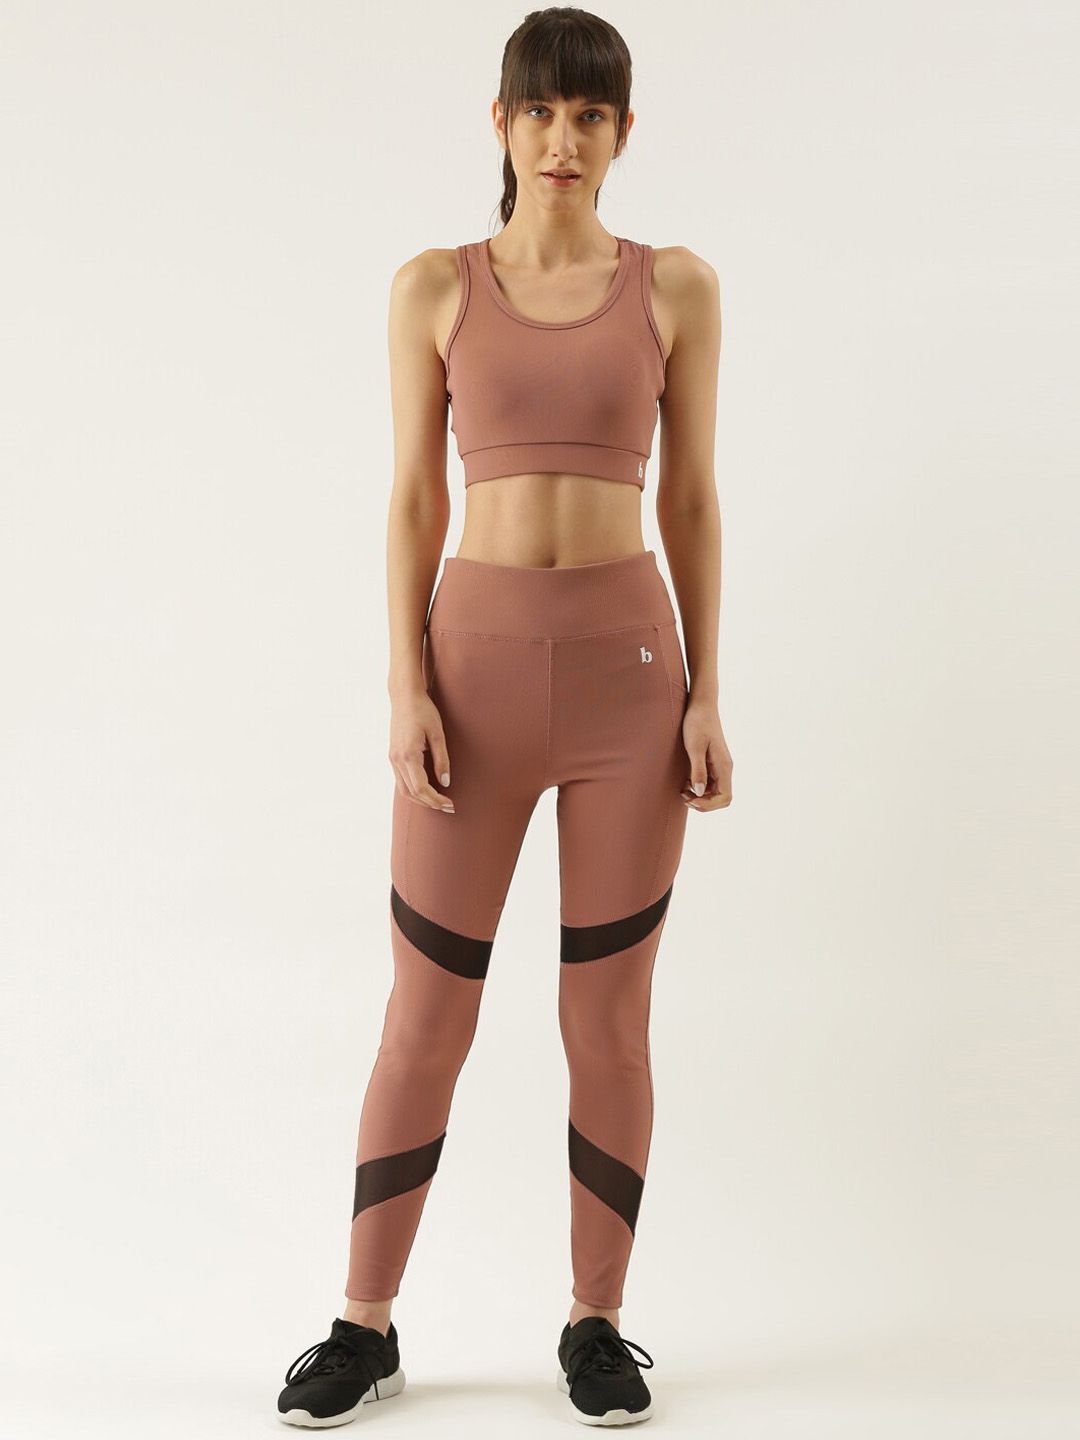 Bannos Swagger Women Mauve Sport Bra & Tights Set Price in India